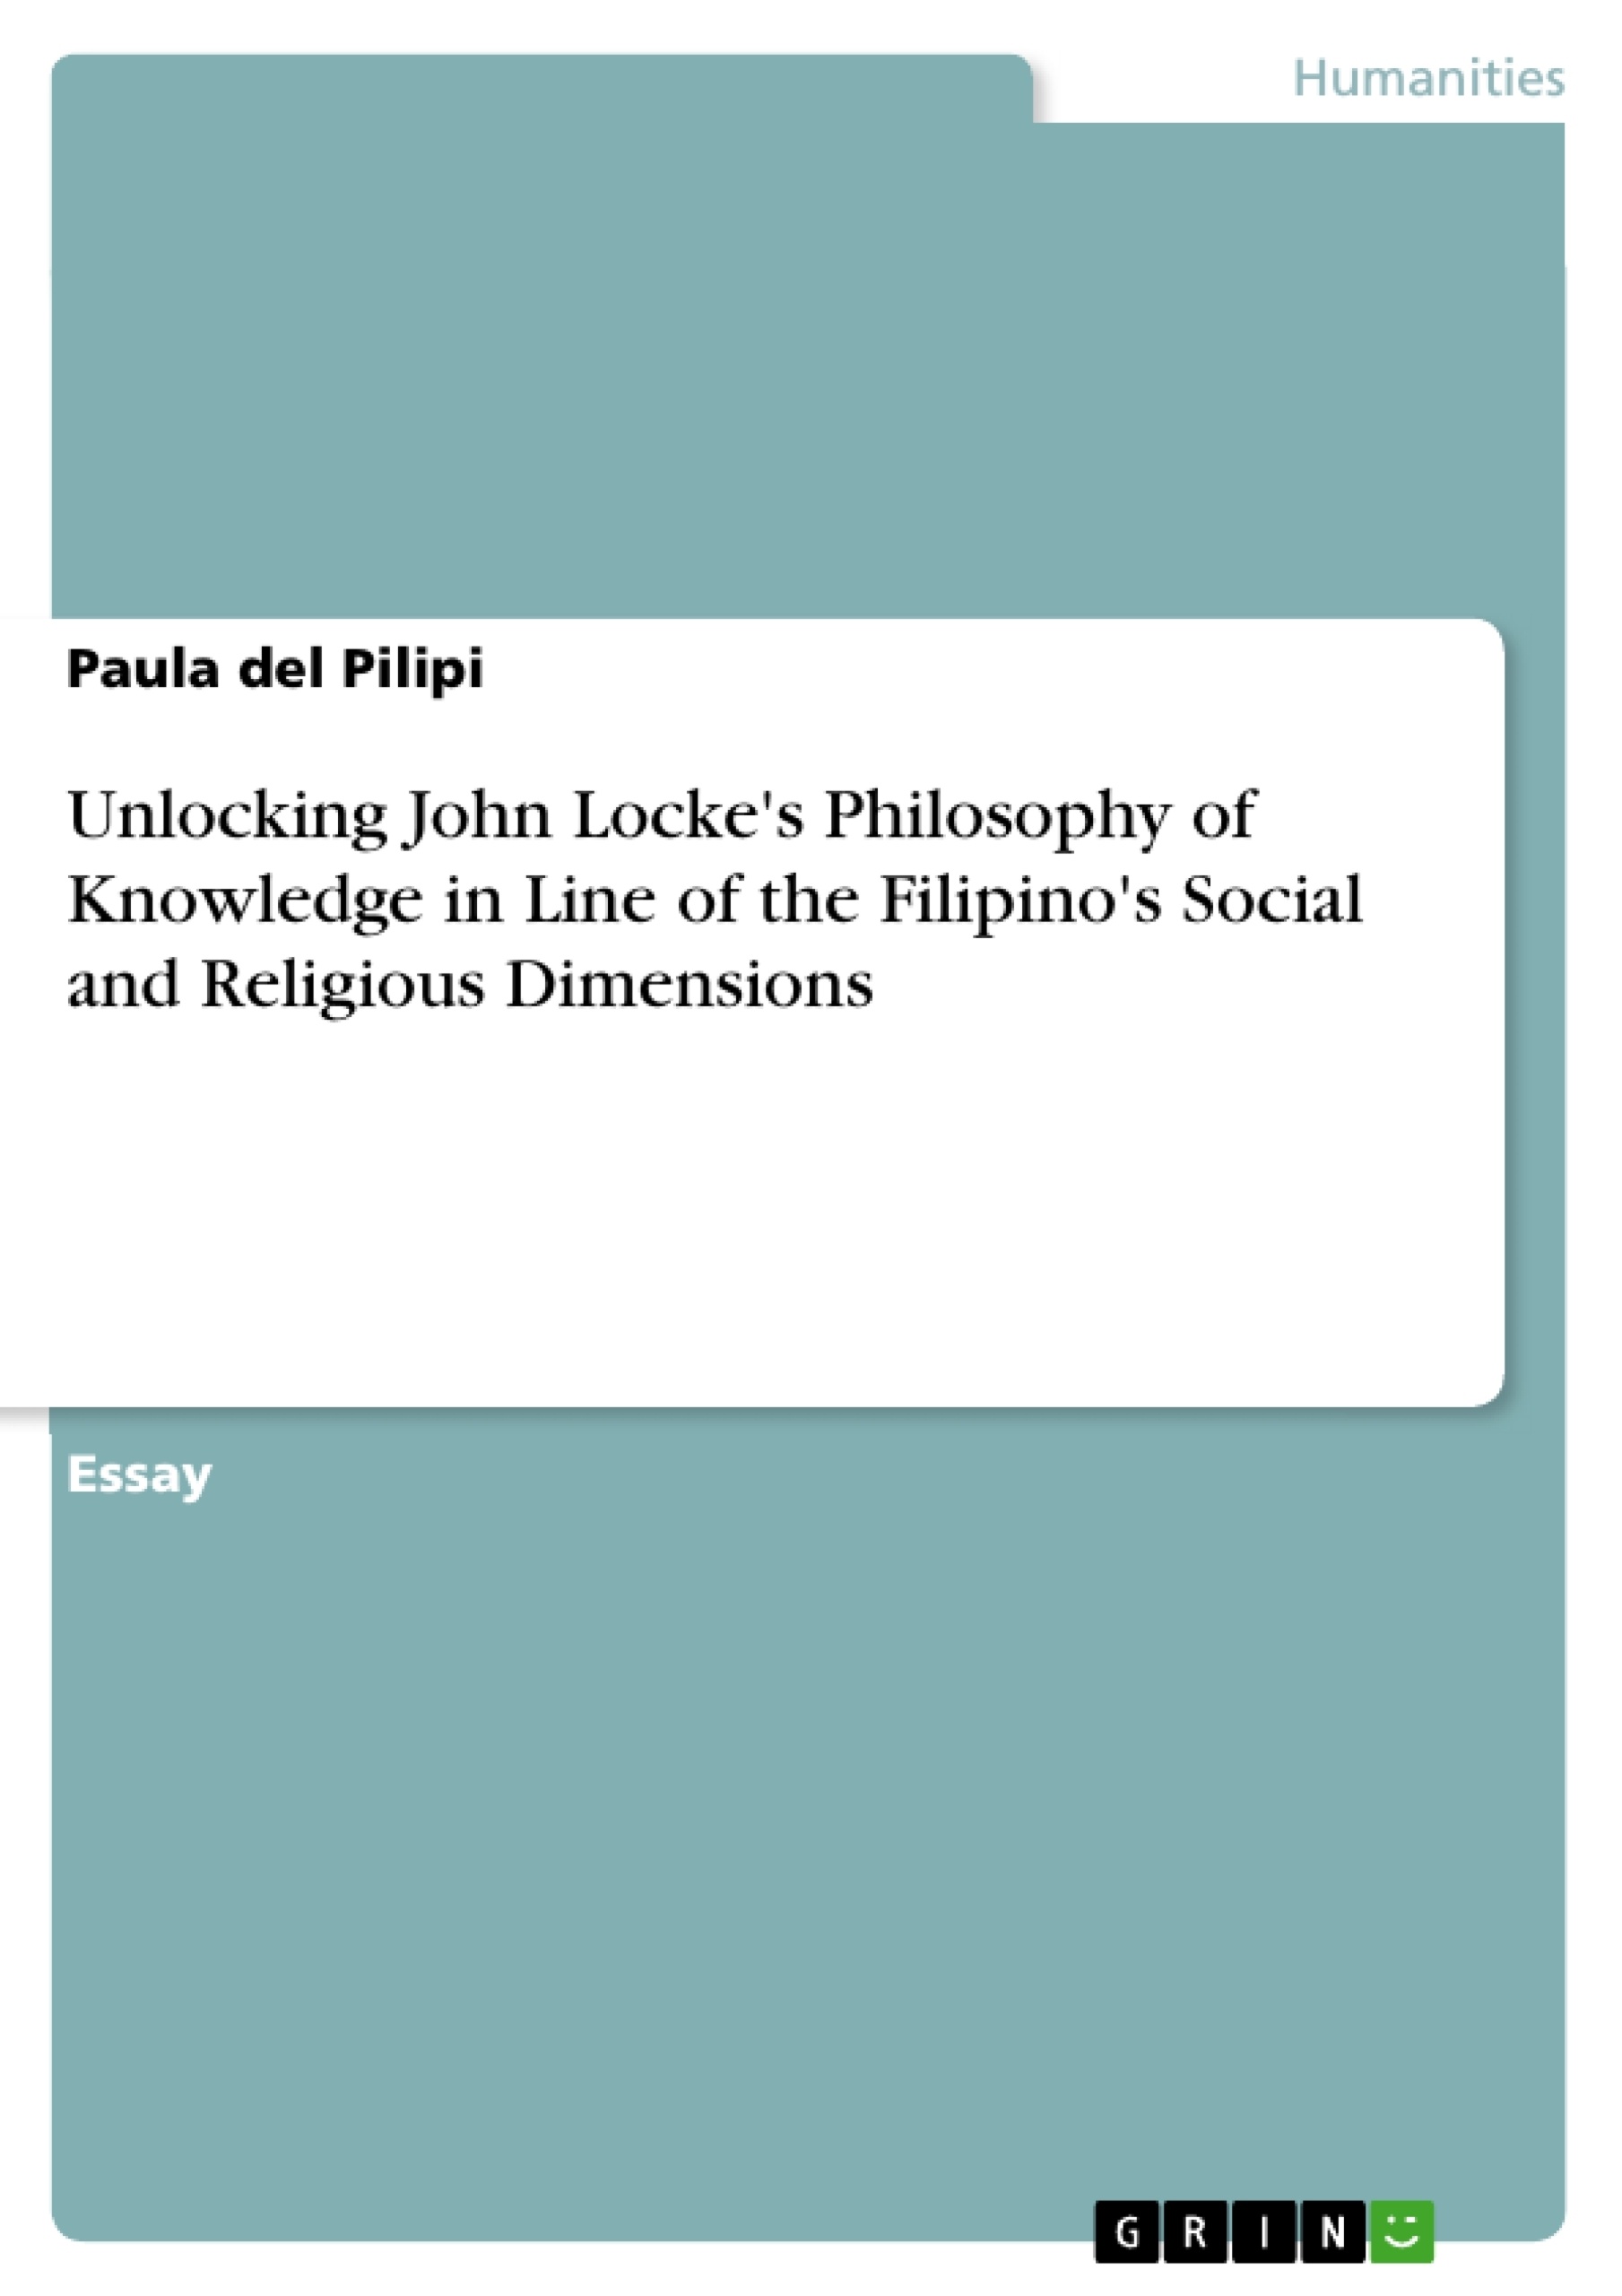 Title: Unlocking John Locke's Philosophy of Knowledge in Line of the Filipino's Social and Religious Dimensions